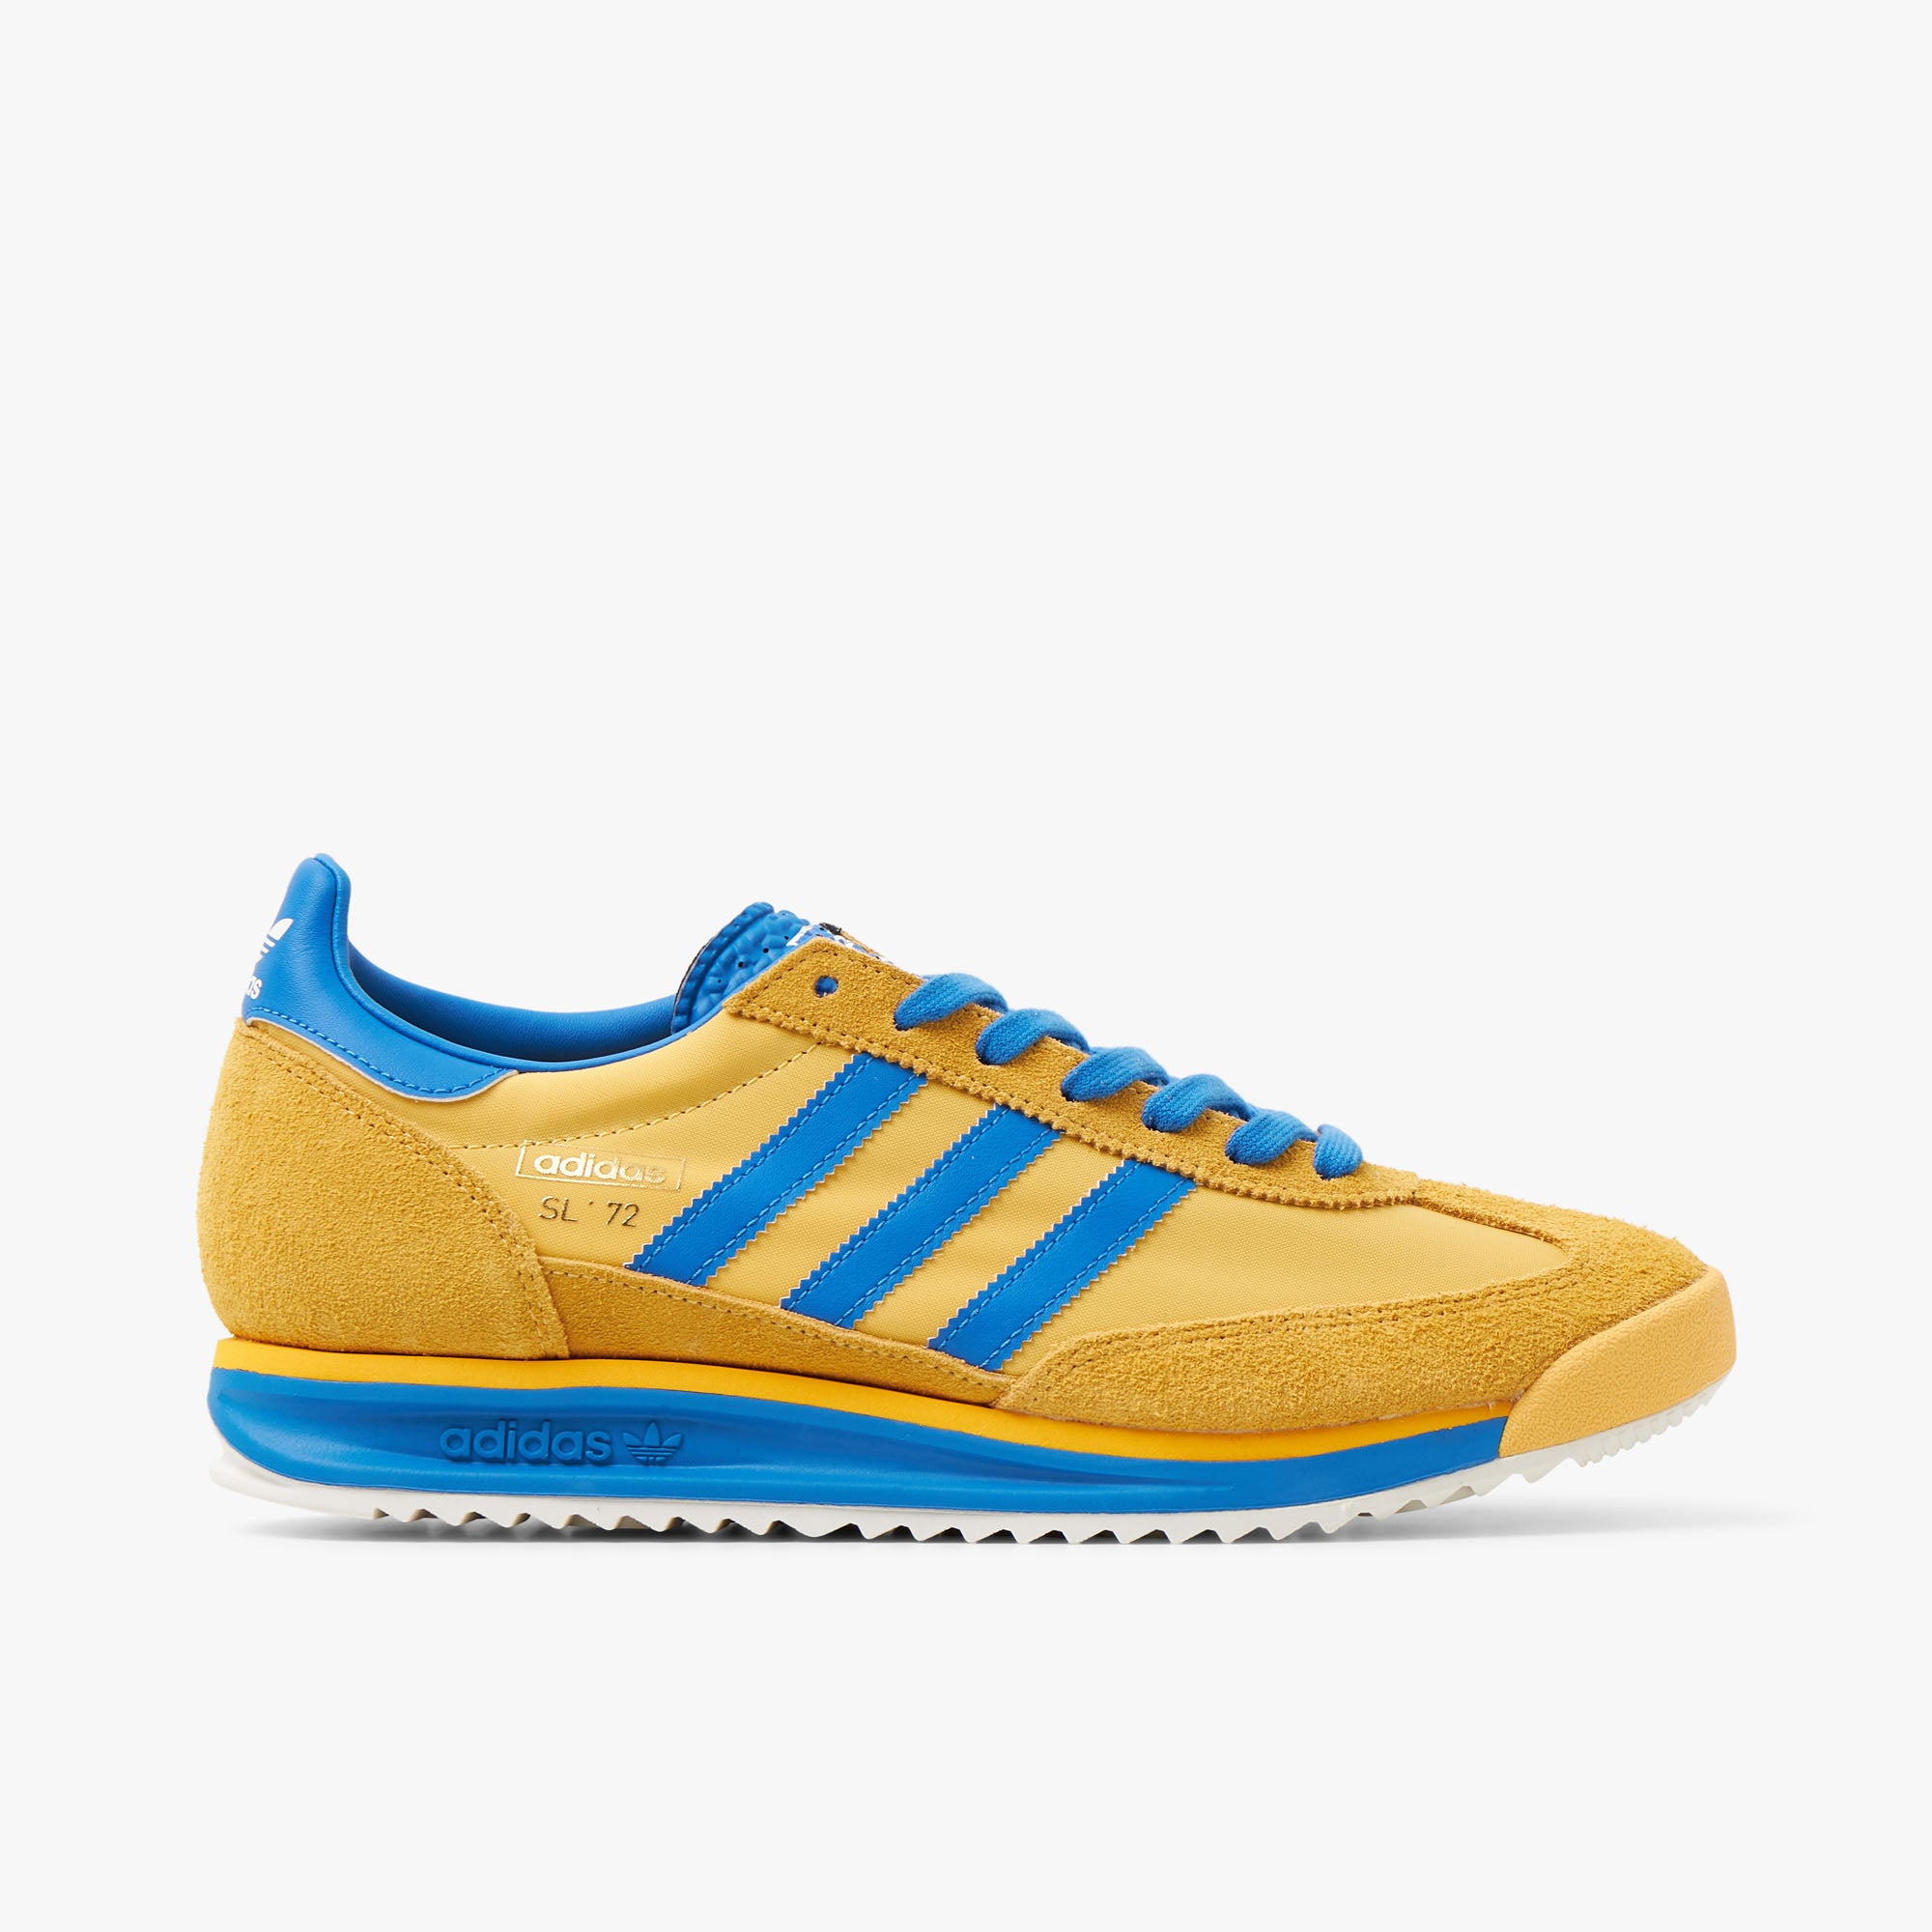 adidas Originals SL 72 RS Utility Yellow / Bright Royal - Core White - Low Top  1